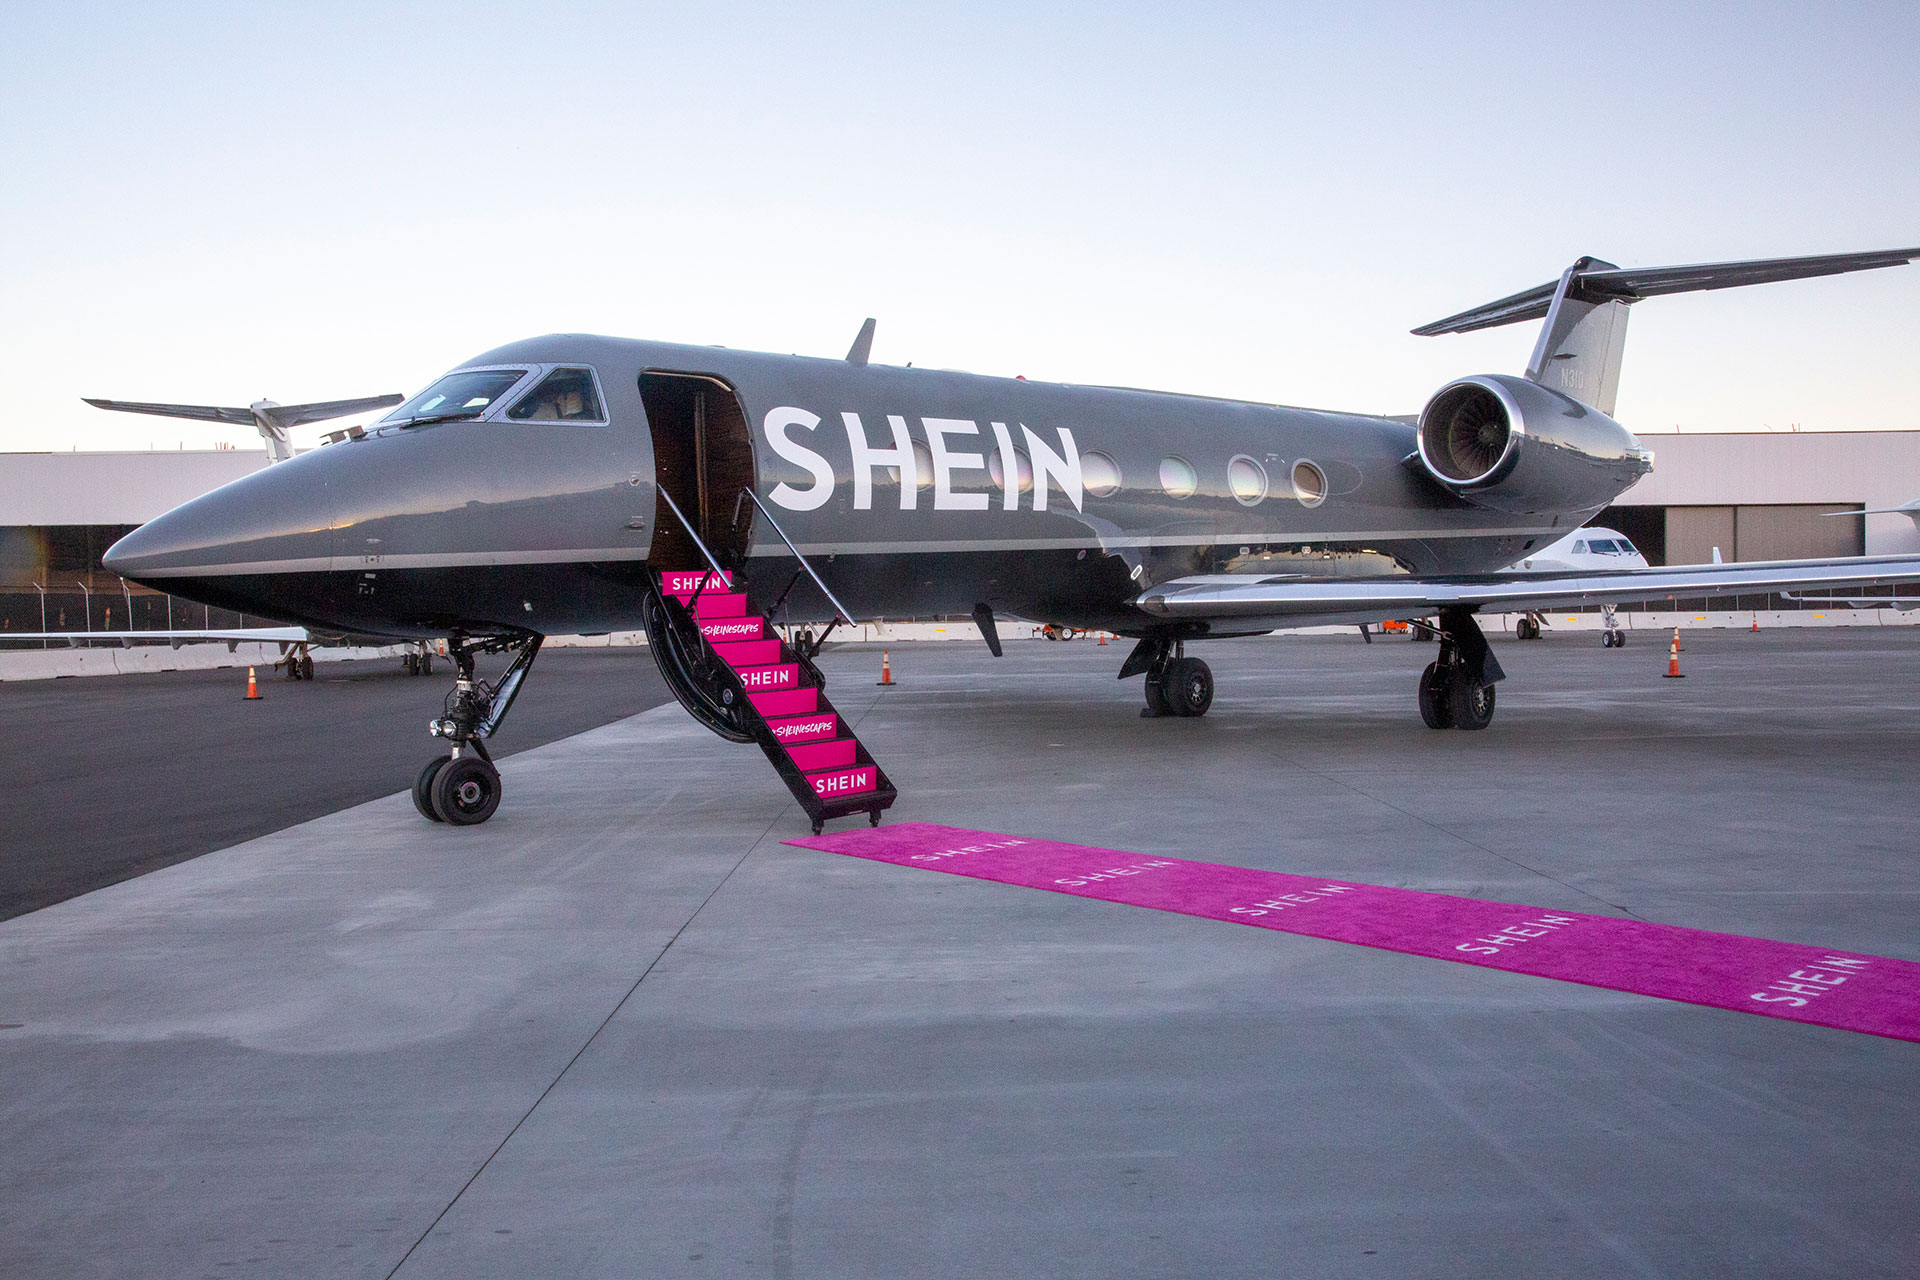 Private Jet with SHEIN paint job for the SHEIN Influencer trip